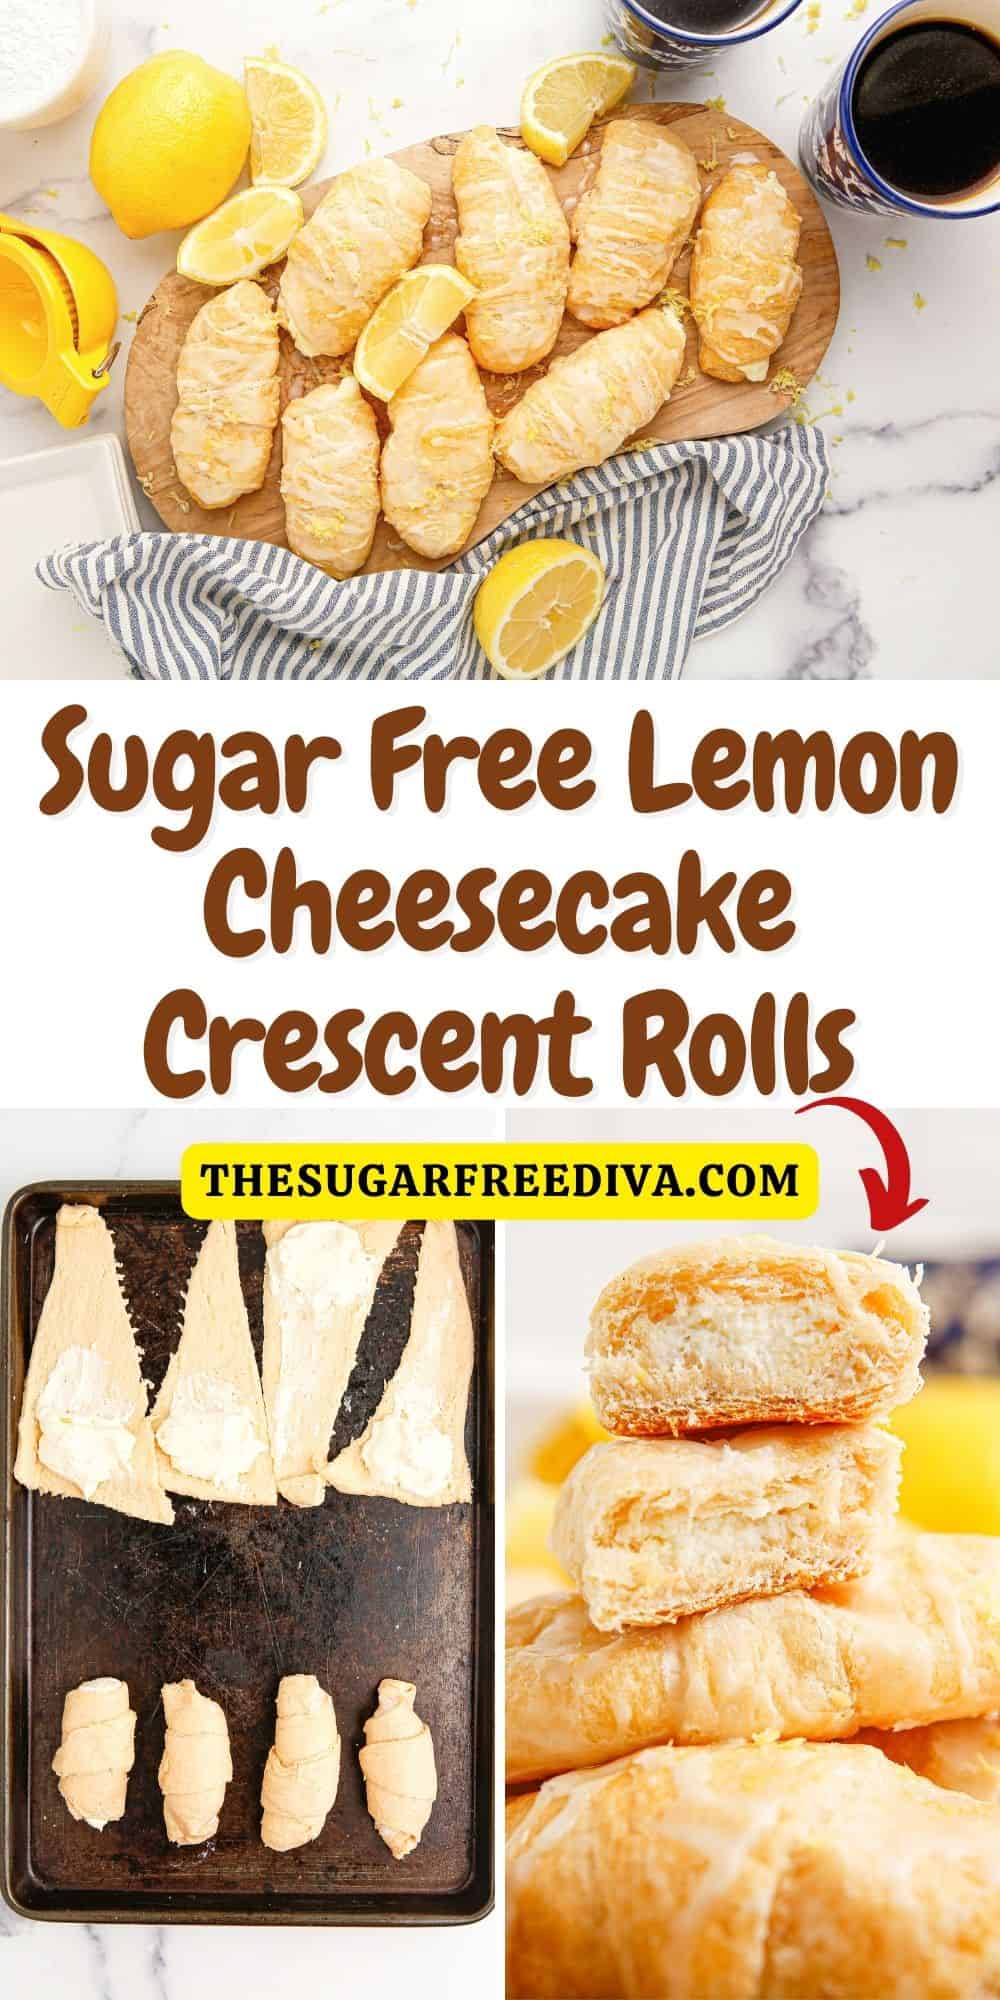 Sugar Free Lemon Cheesecake Crescent Rolls, a quick and easy breakfast or brunch recipe made with refrigerated dough in less than 30 minutes.